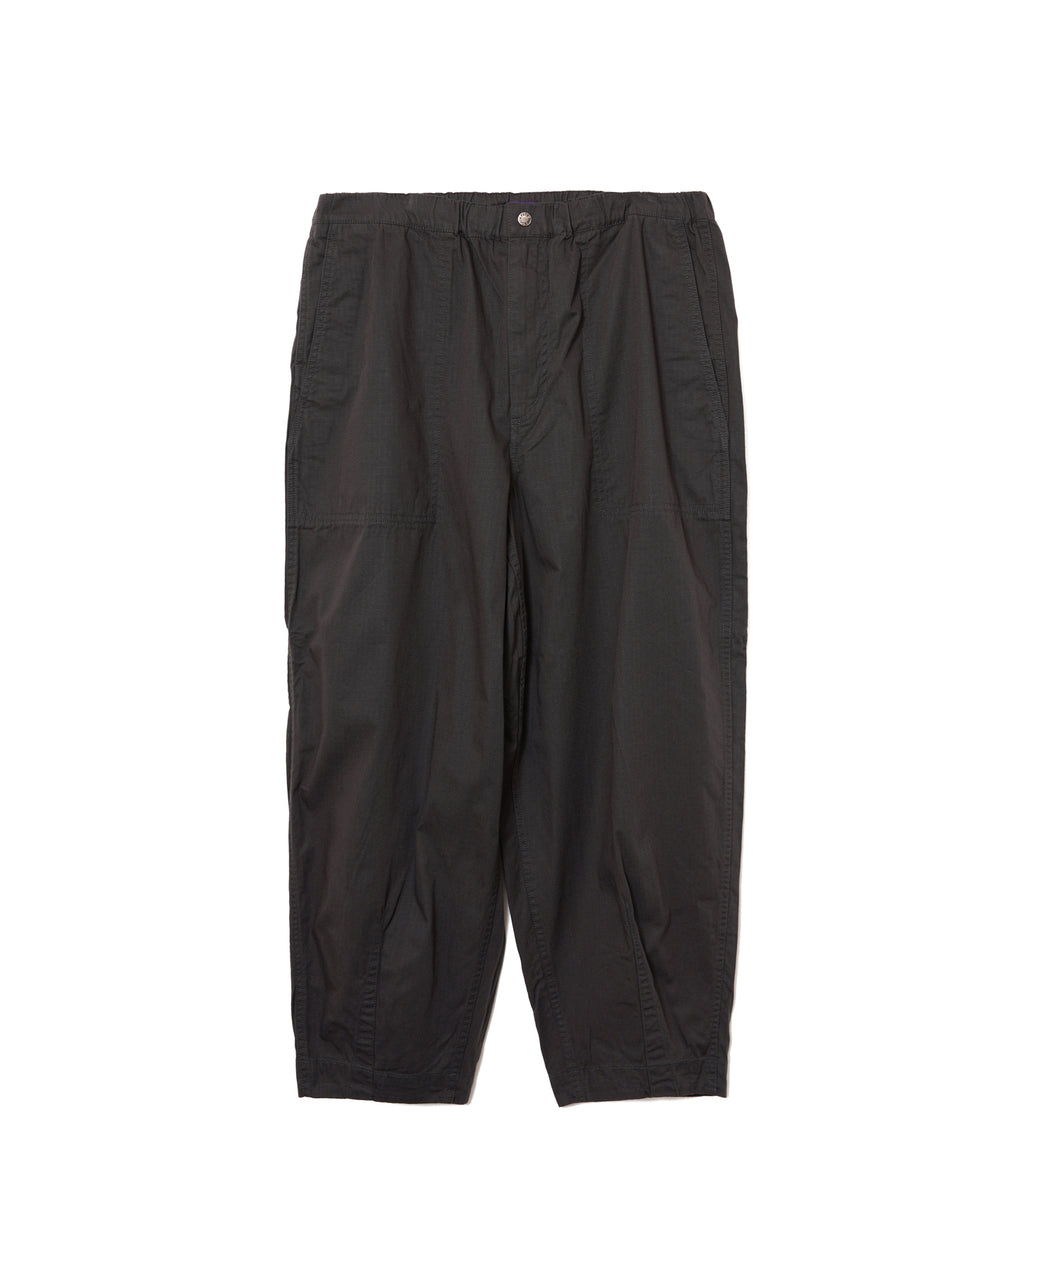 【MEN】THE NORTH FACE PURPLE LABEL Ripstop Wide Cropped Field Pants